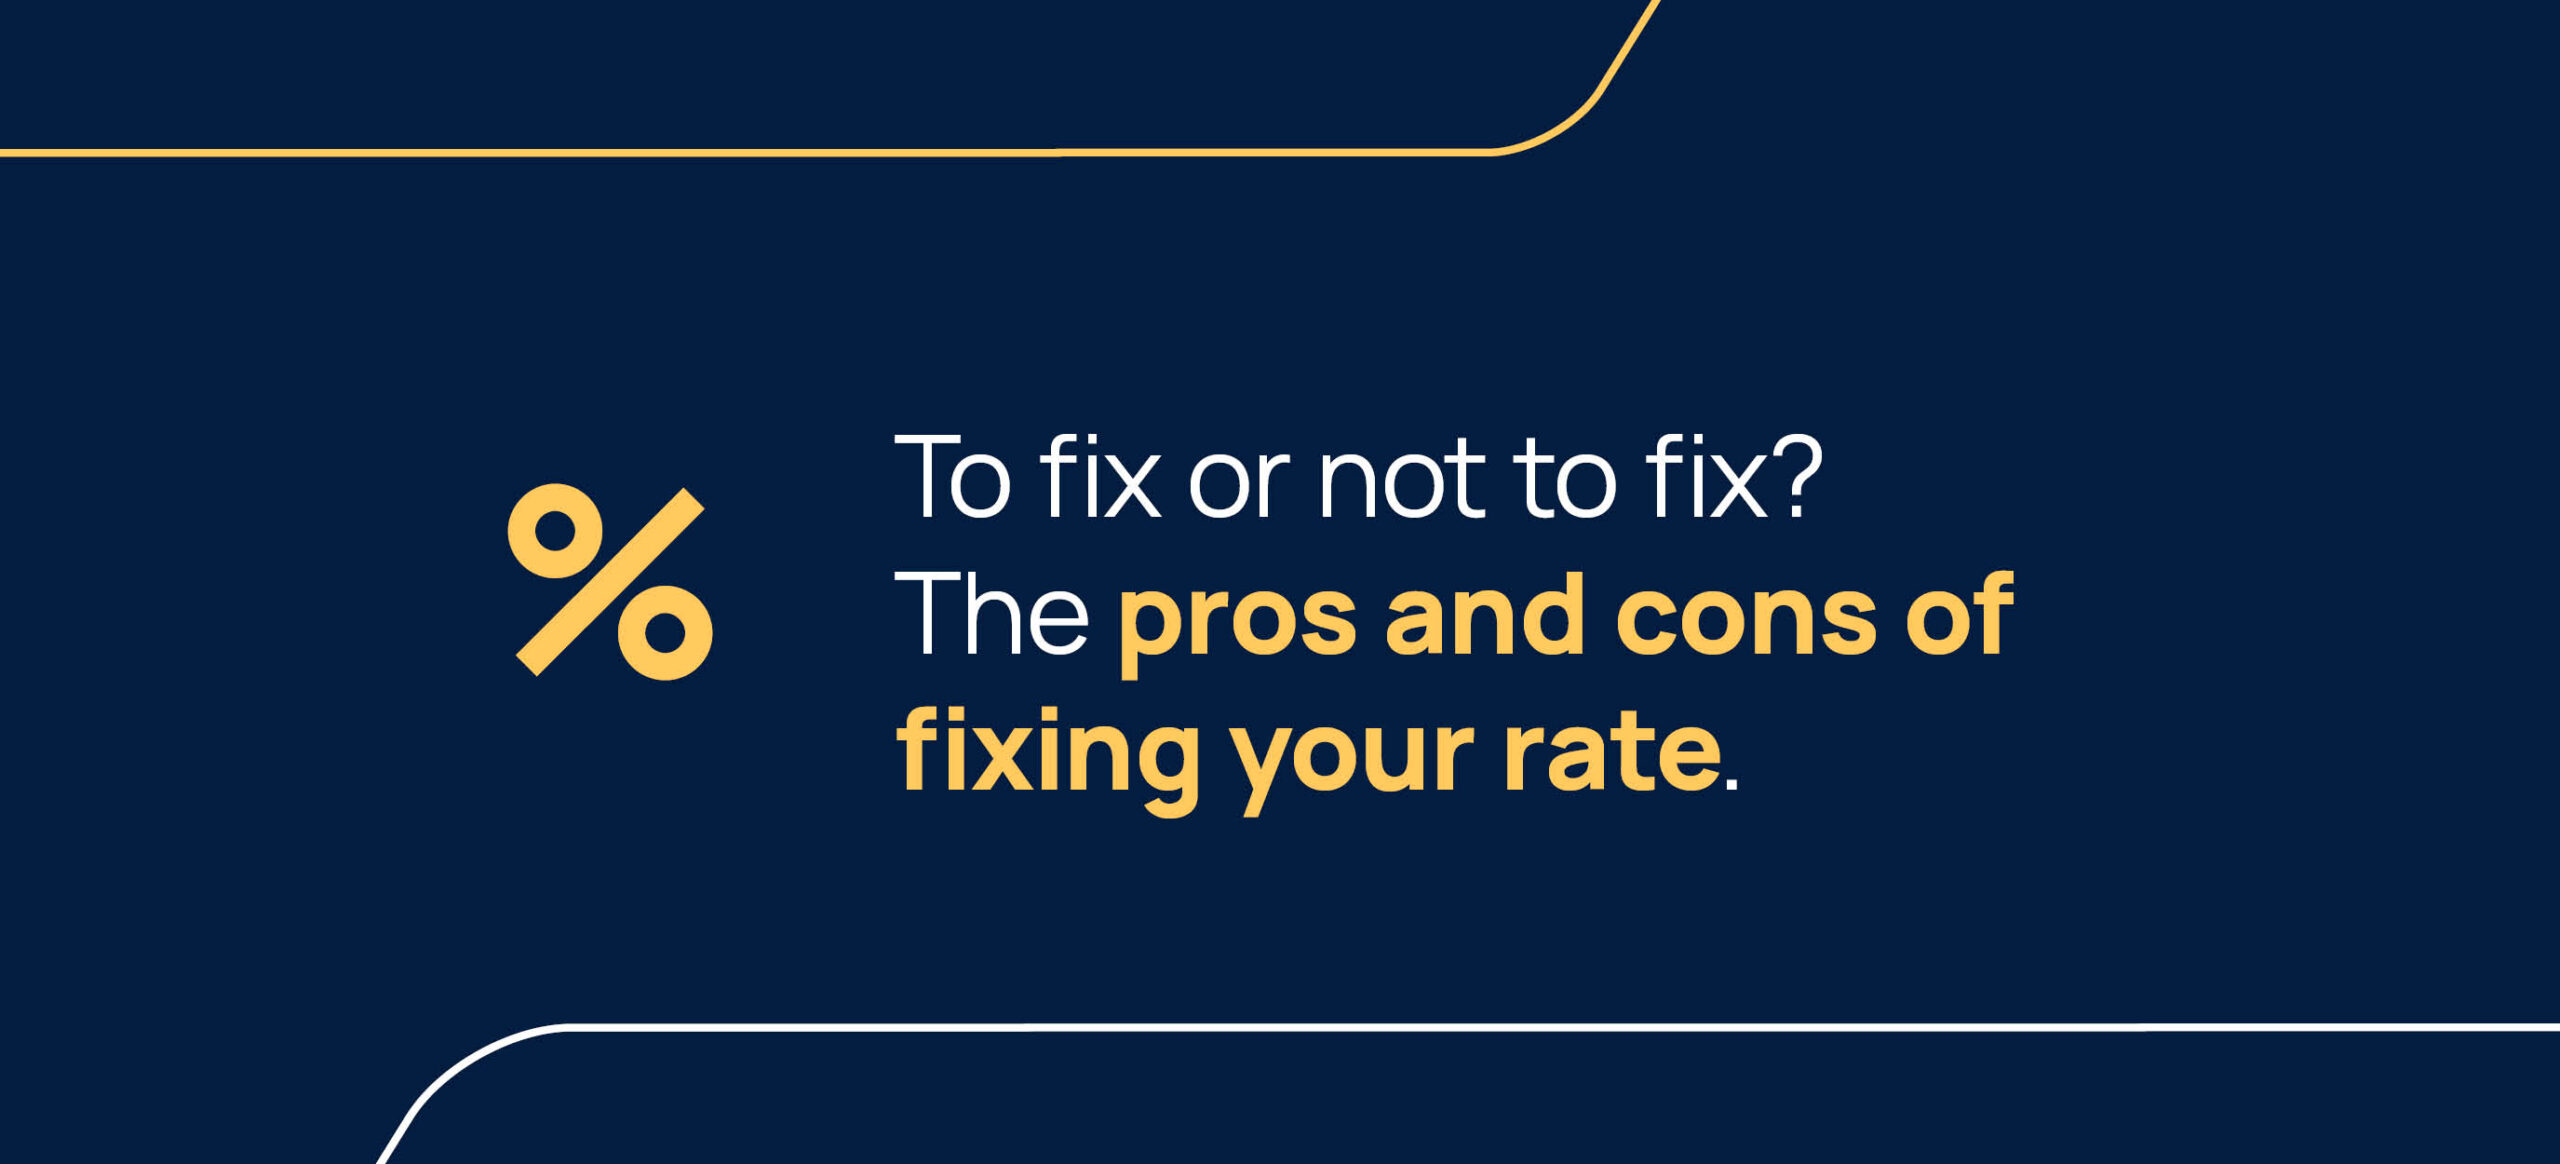 To fix or not to fix? The pros and cons of fixing your rate.